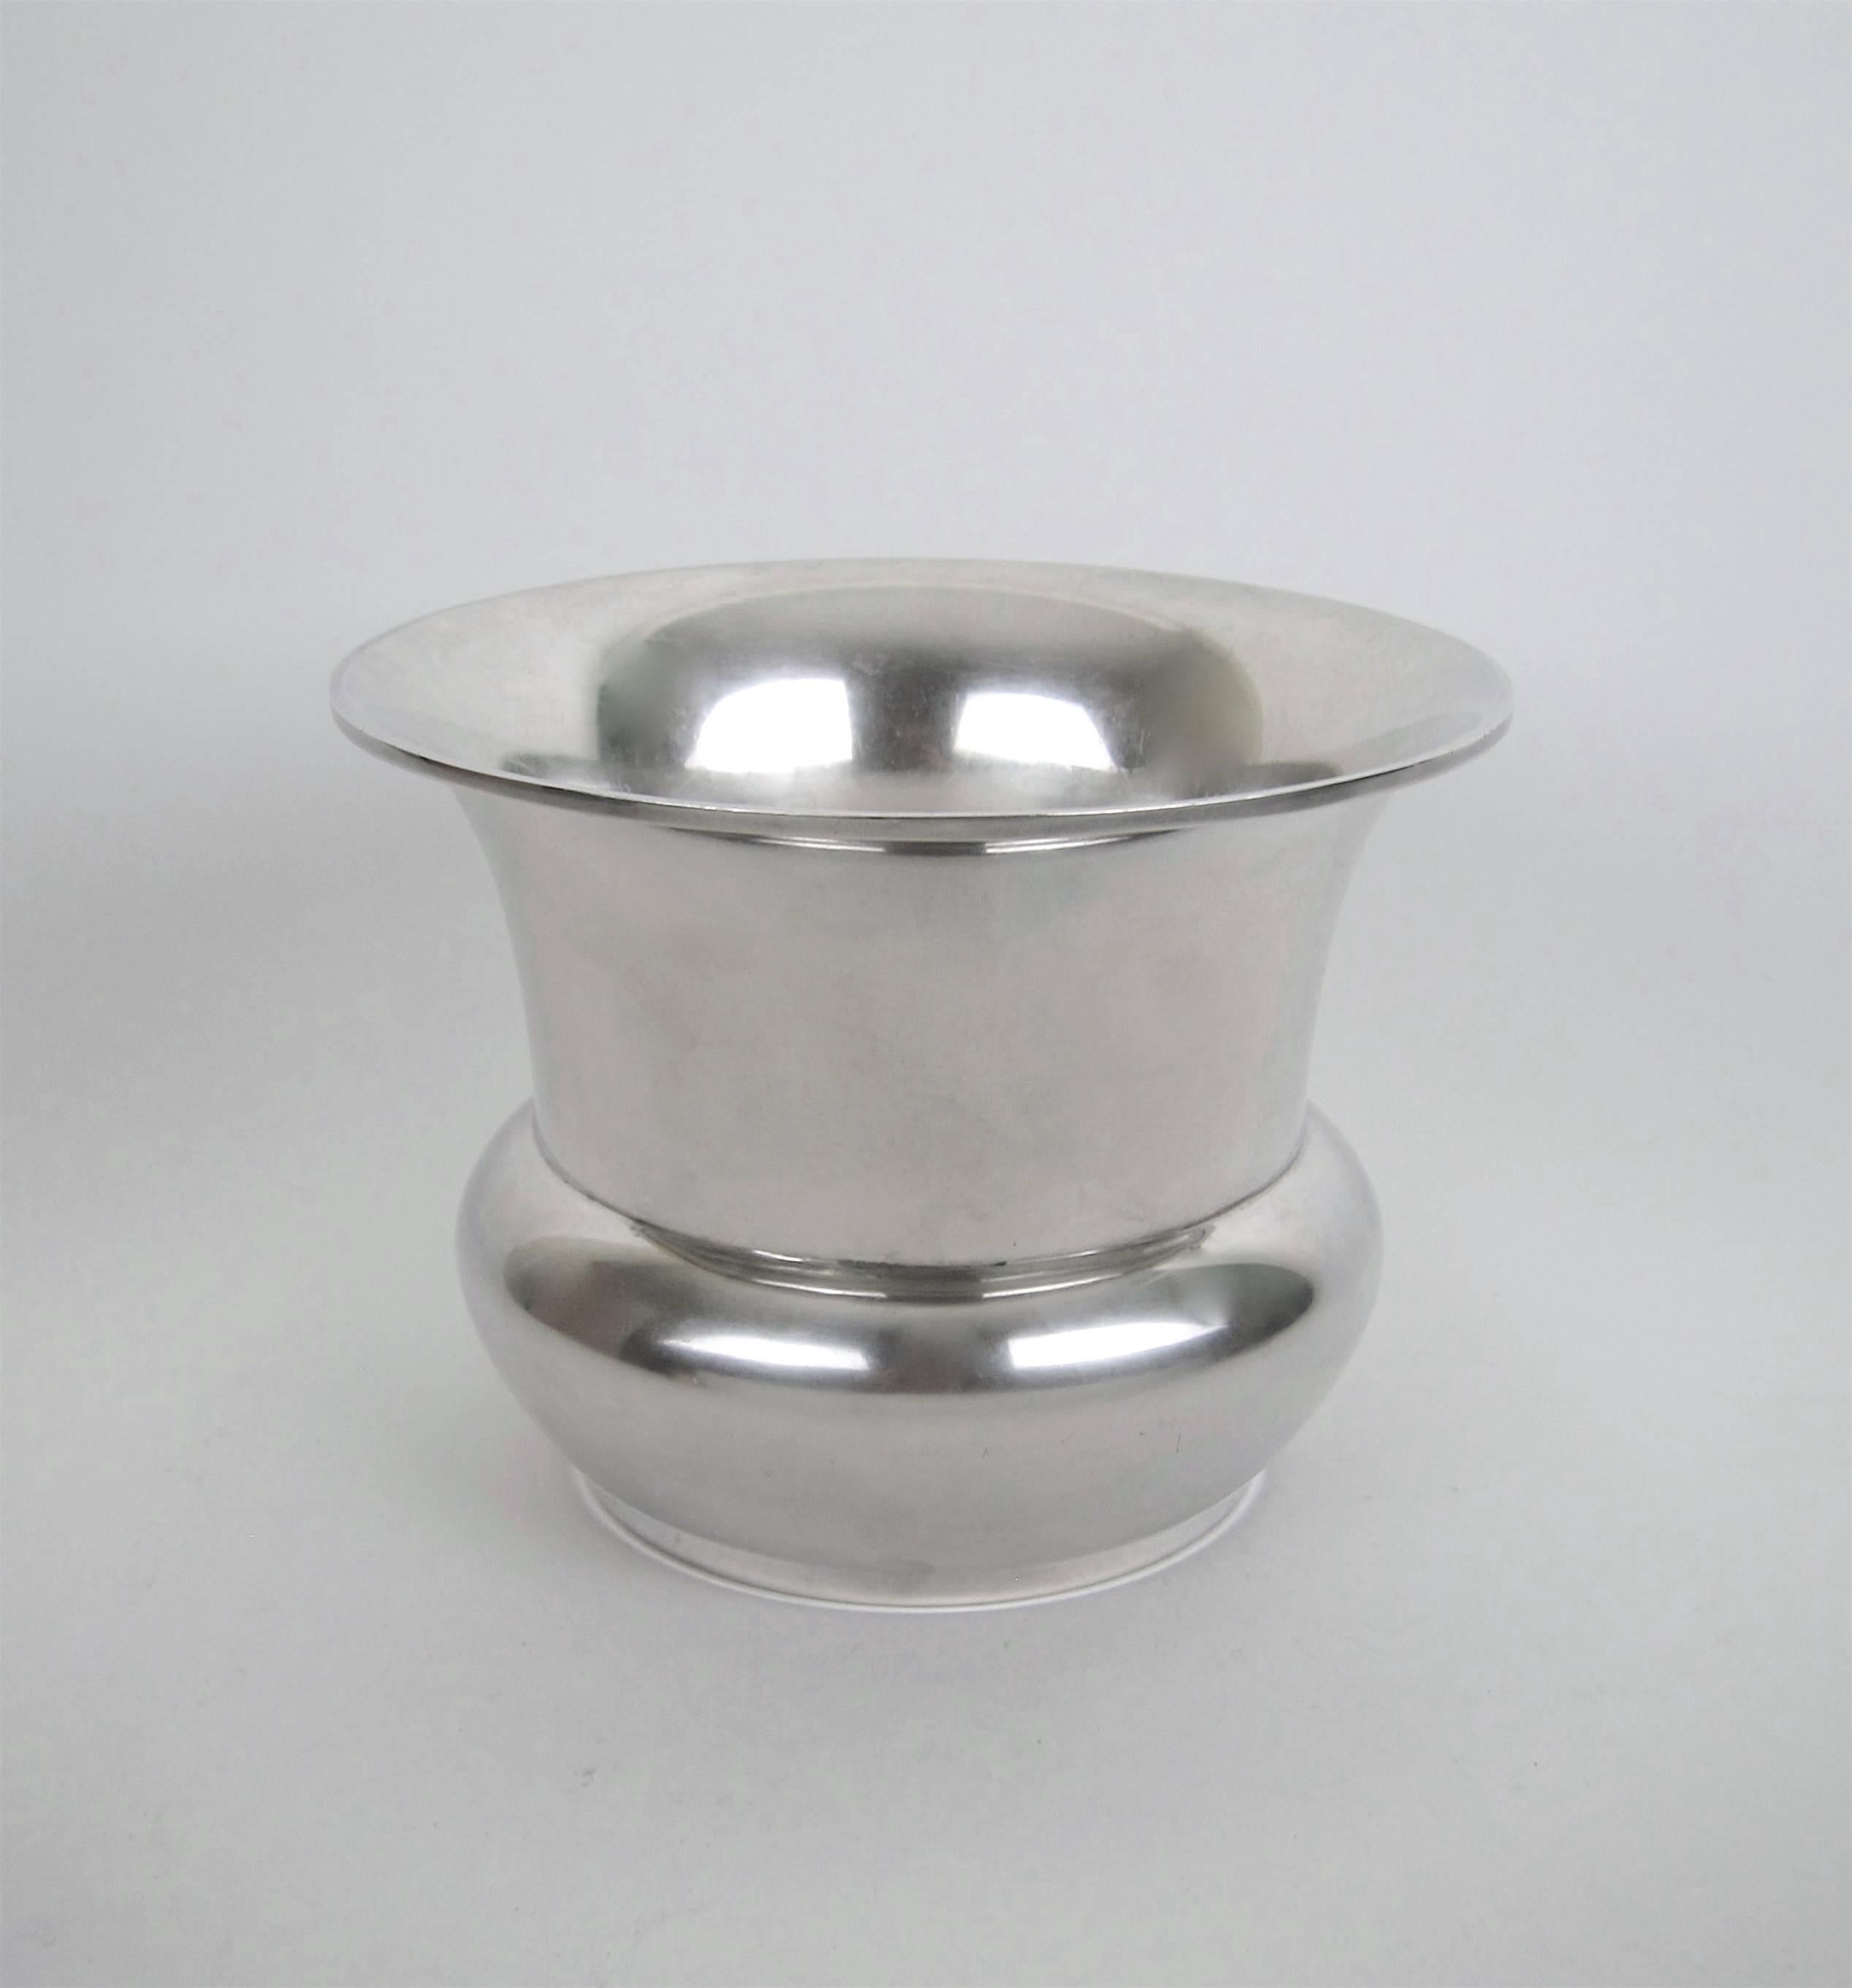 An American sterling silver vase with a flaring, wire-wrapped rim by Marie Zimmermann (1879-1972), a noted metalsmith, jeweler and designer active during the opening decades of the 20th century. The vase comes from the silversmith's estate and dates